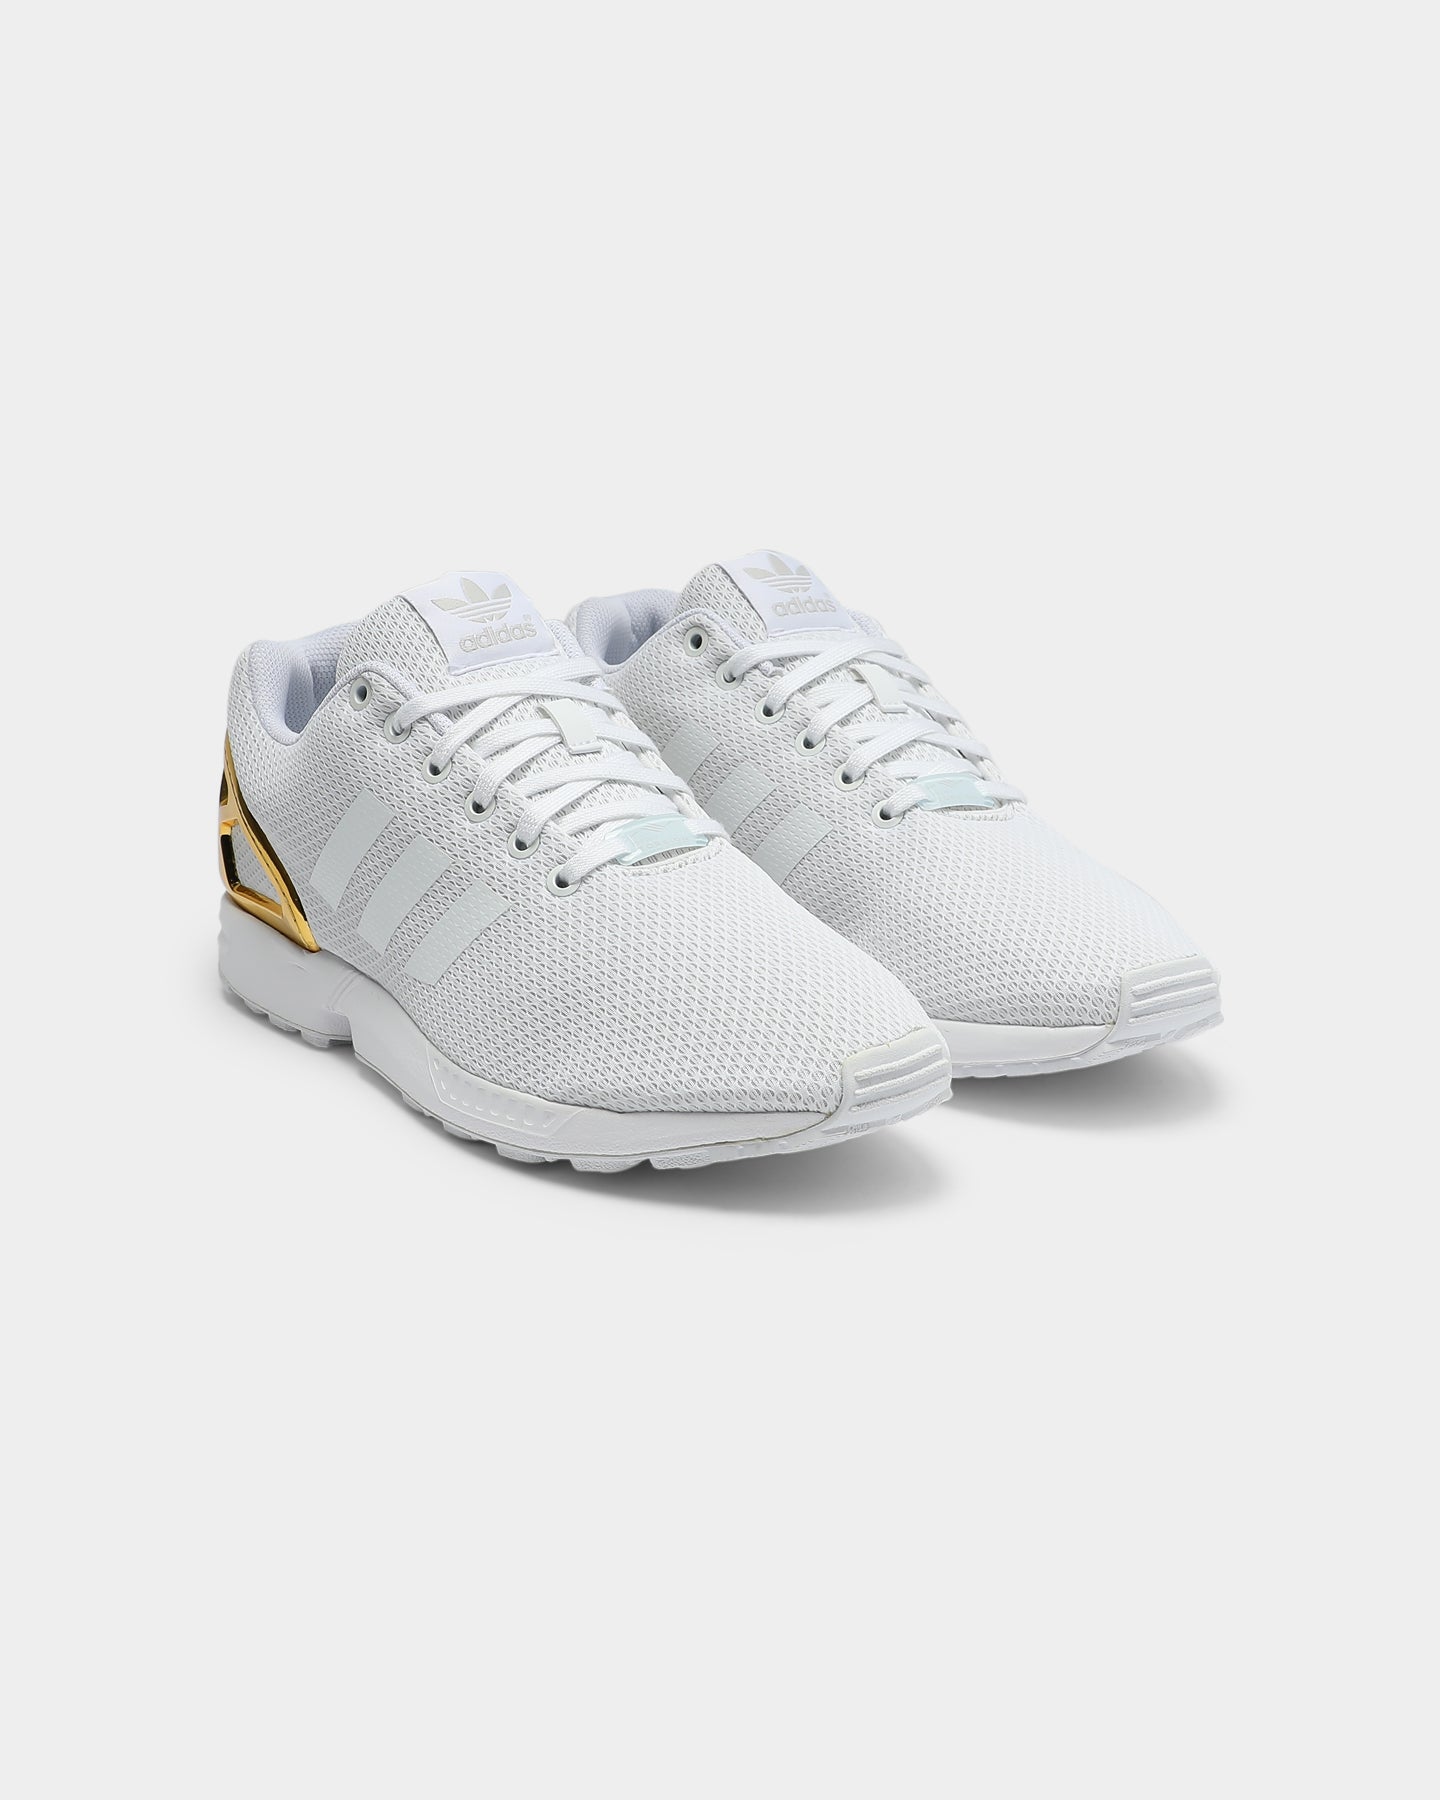 adidas zx flux white and gold